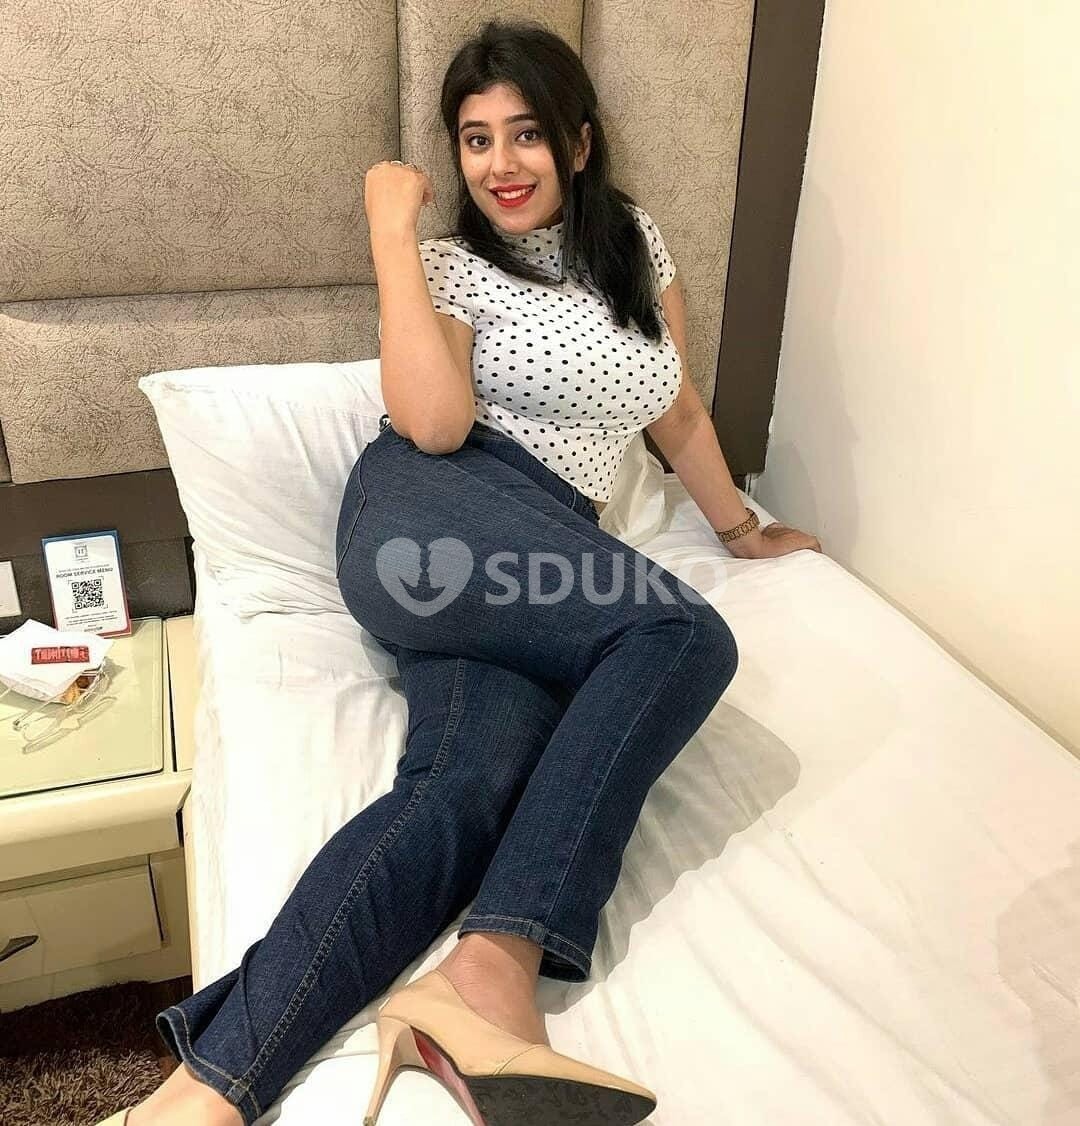 PIMPRI CHINCHWAD 🔅 LOW RATE( Divya )ESCORT FULL HARD FUCK WITH NAUGHTY IF YOU WANT TO FUCK MY PUSSY WITH BIG BOOBS GI